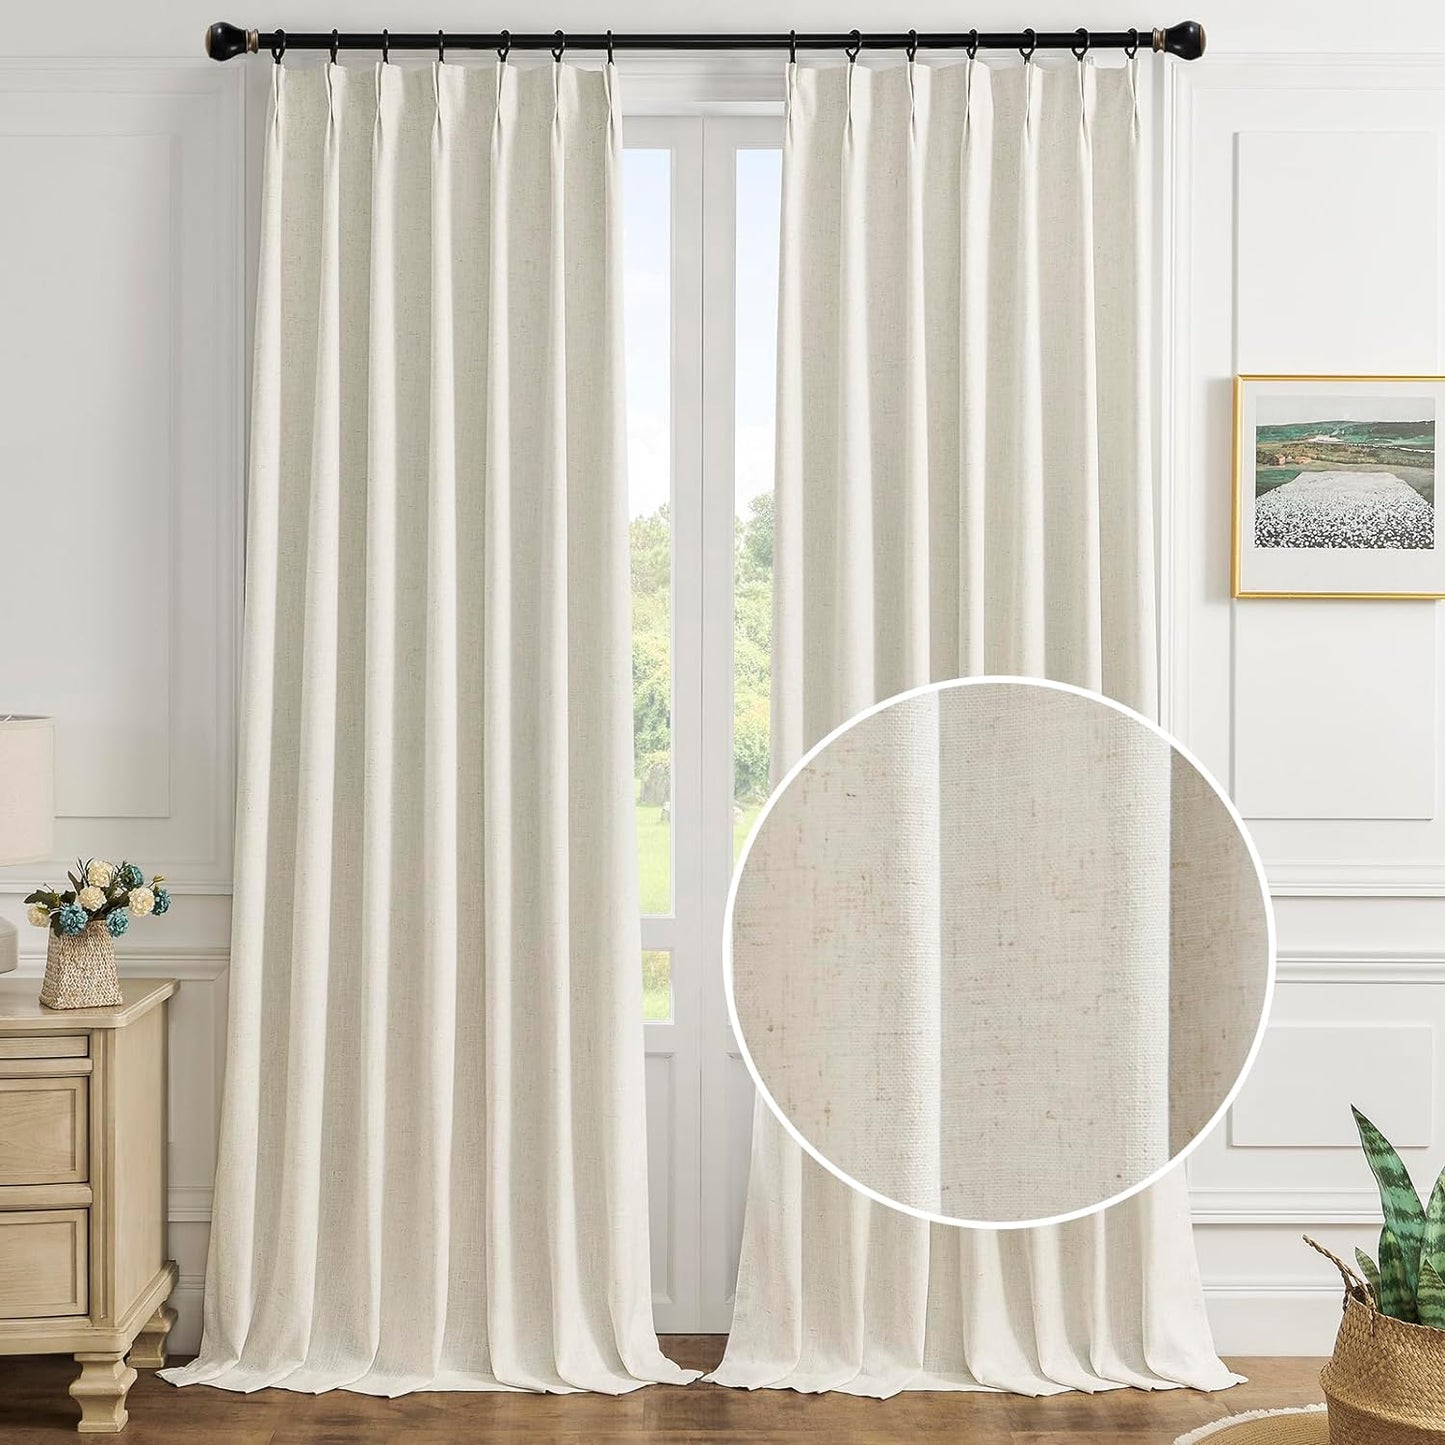 Maison Colette Pinch Pleat Natural Linen Sheer Curtain 95 Inches Long,Back Tab Stripe Transparent Voile Window Drapes for Bedroom/Living Room, 2 Panels,42" Width,Linen  Maison Colette Home Linen 40"W X 95"L With Liner 